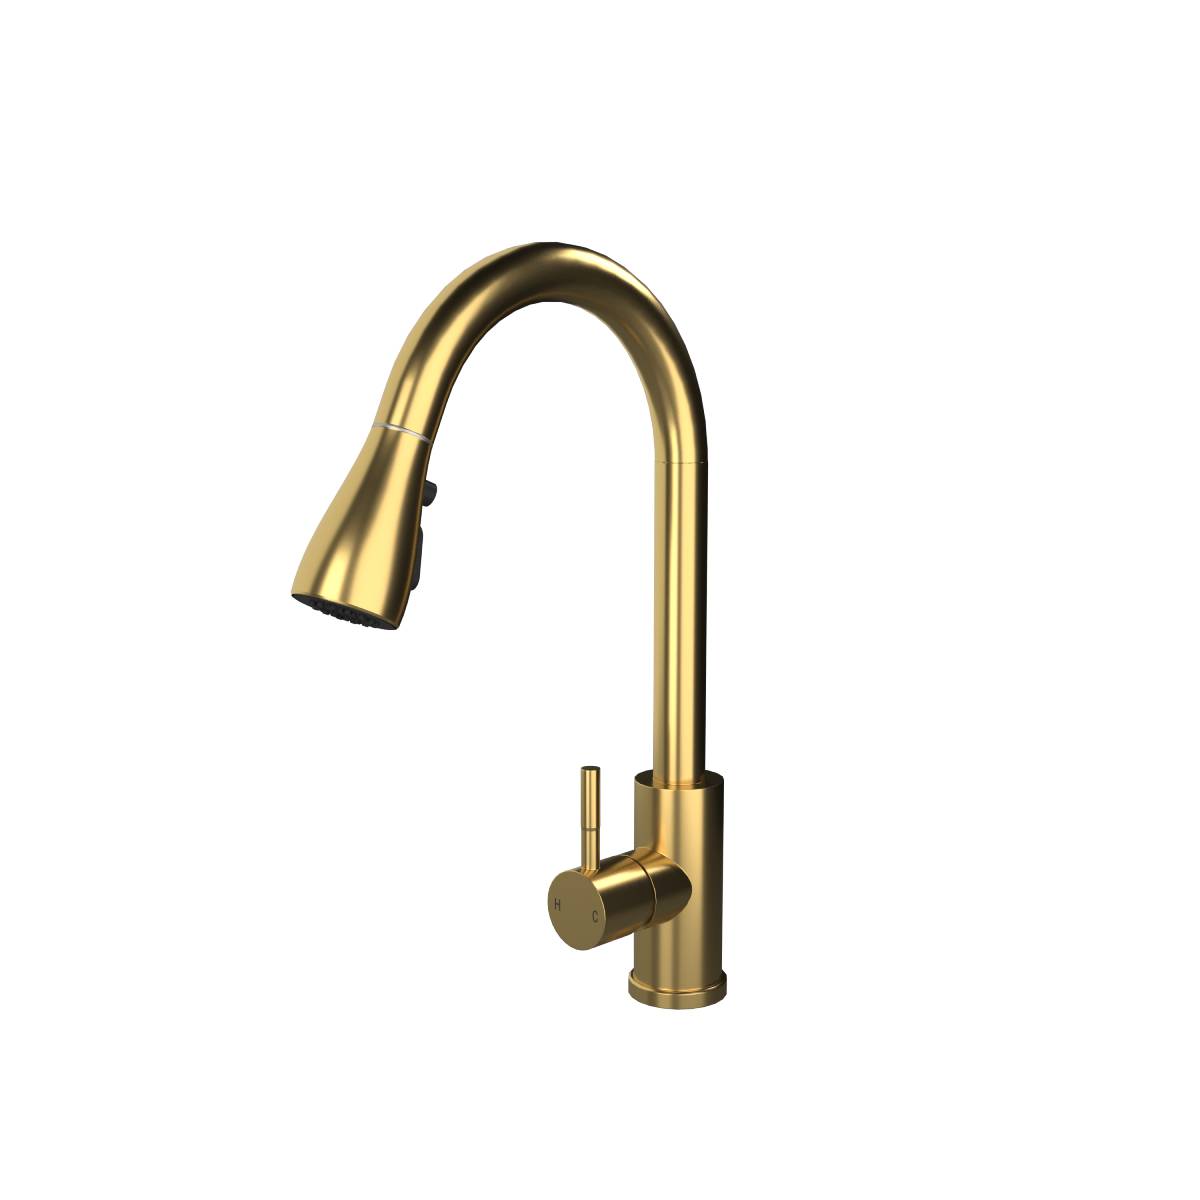 Ellsi Kitchen Sink Mixer with Pull out Spray and Swivel Spout - Brushed Brass (13465)